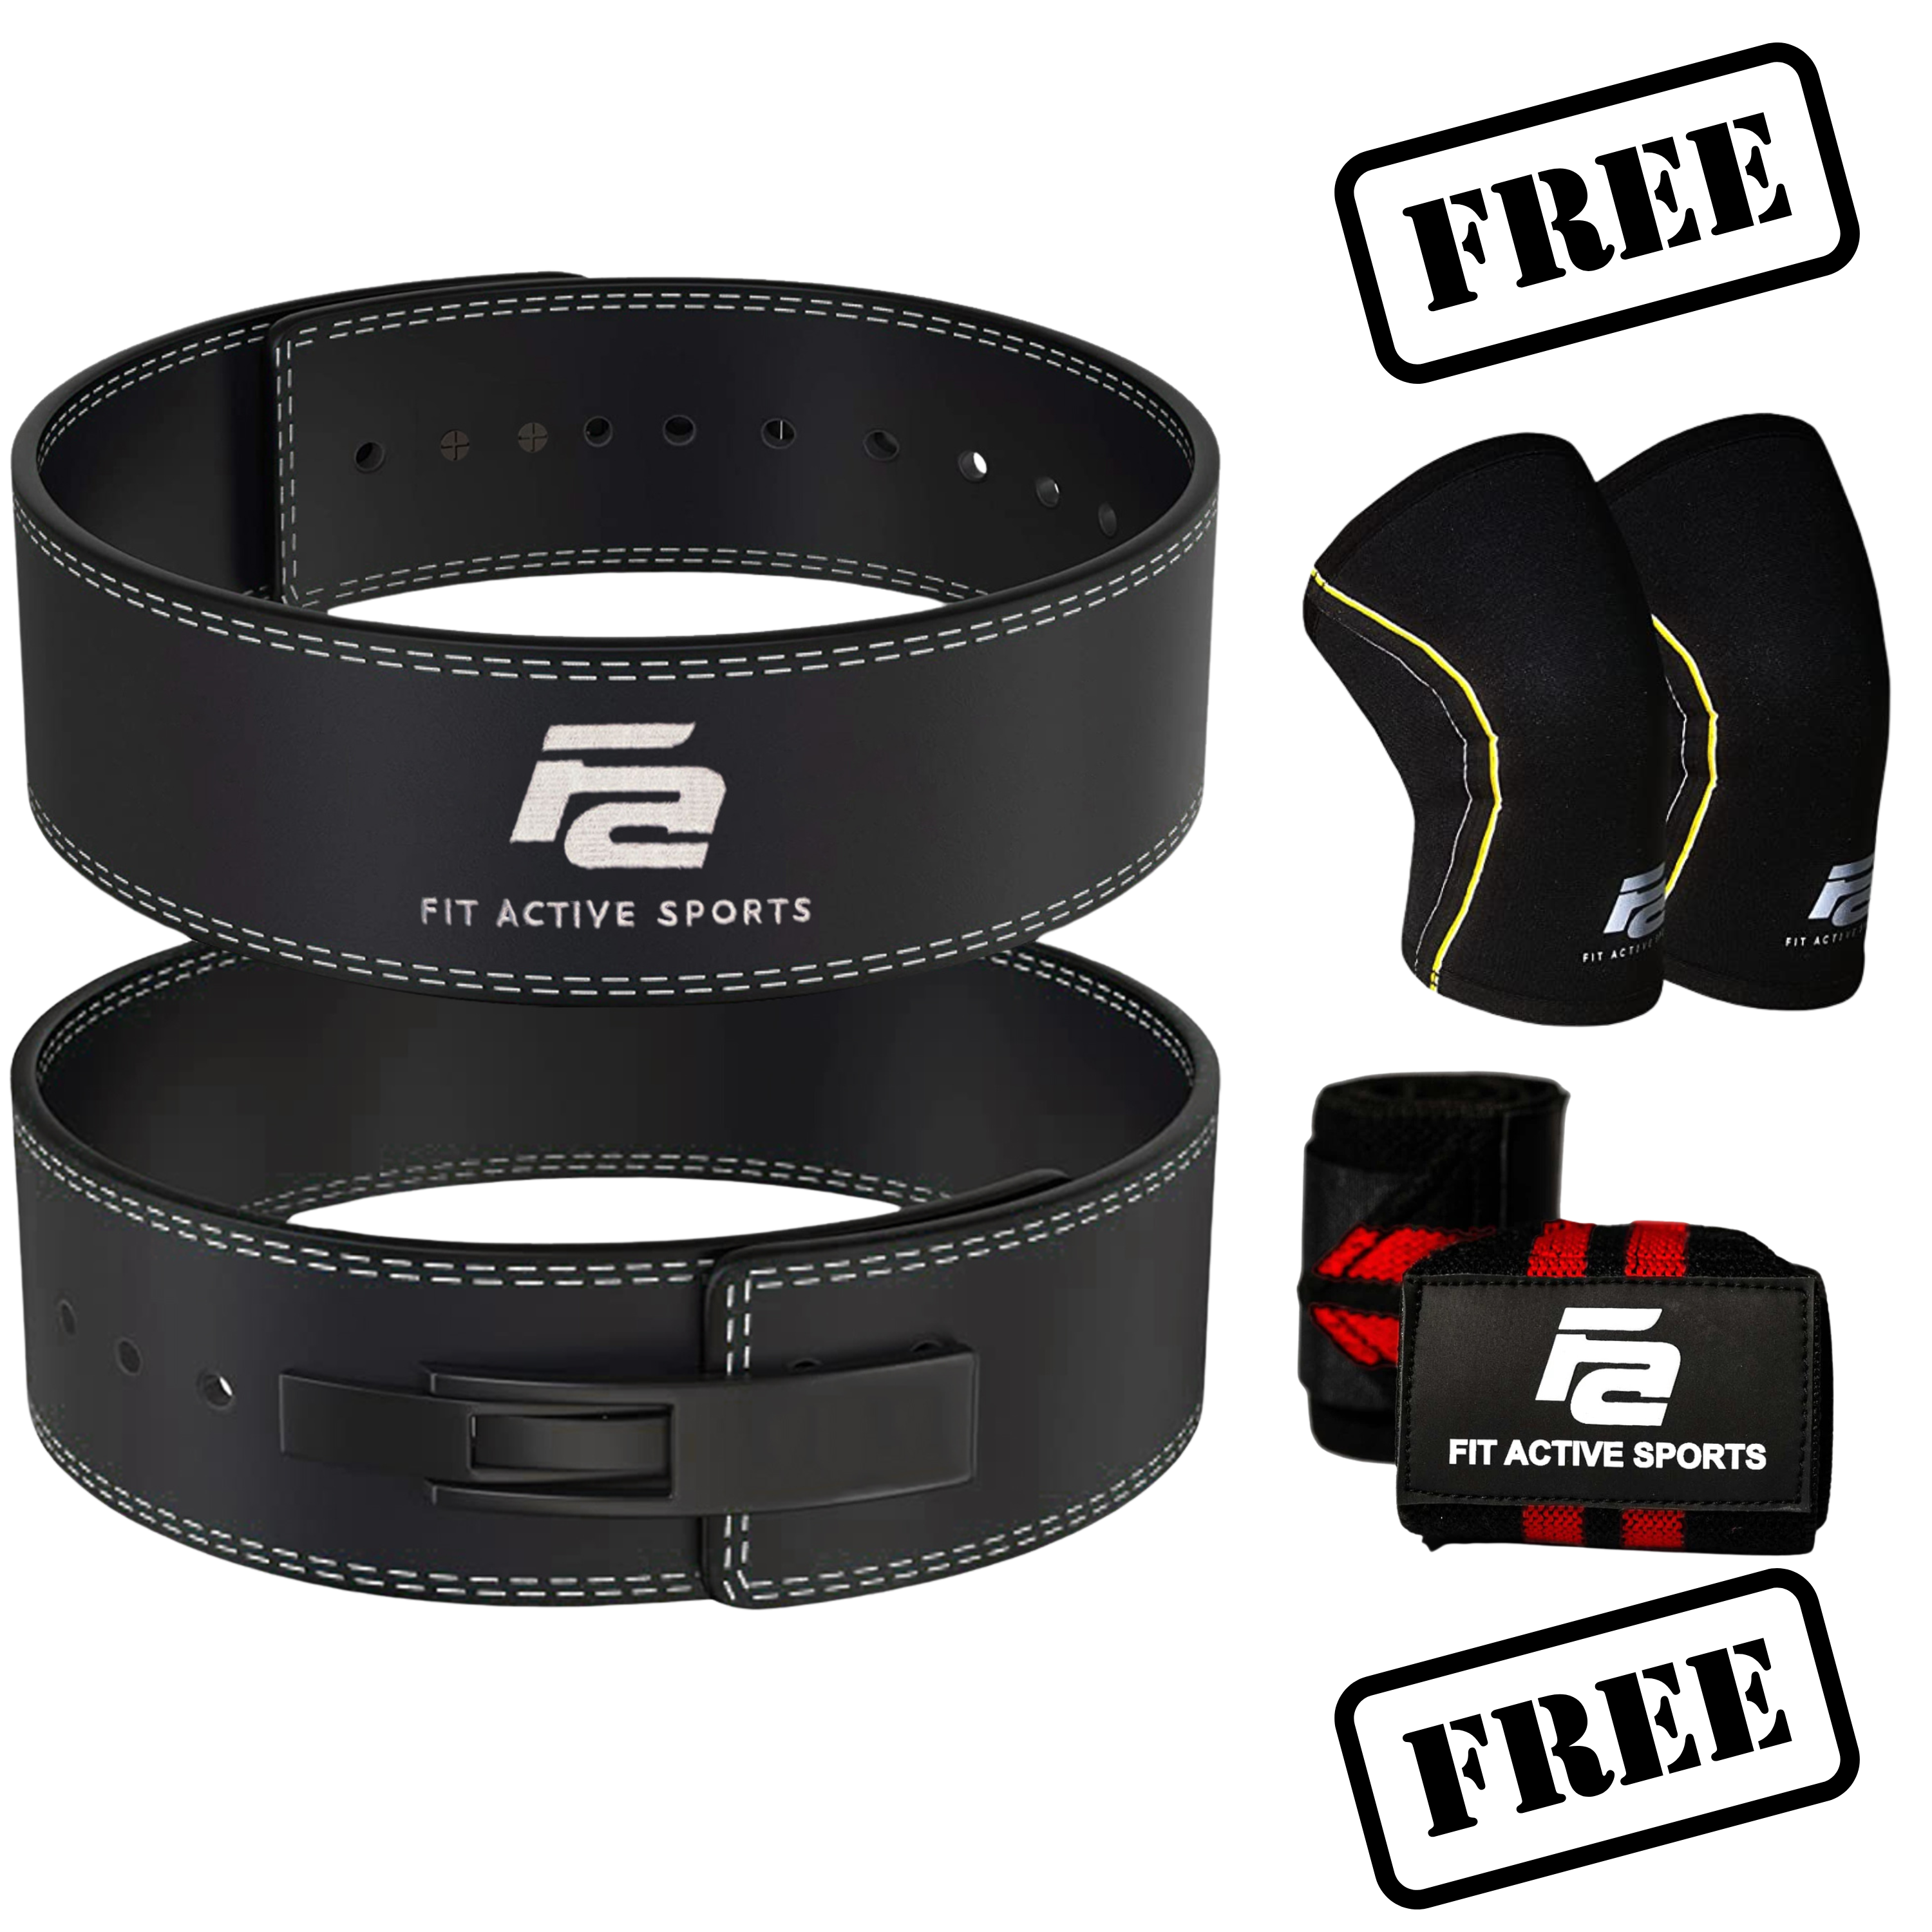 Buy Lever Belt, Get Wrist Wraps and Knee Compression Sleeves Free